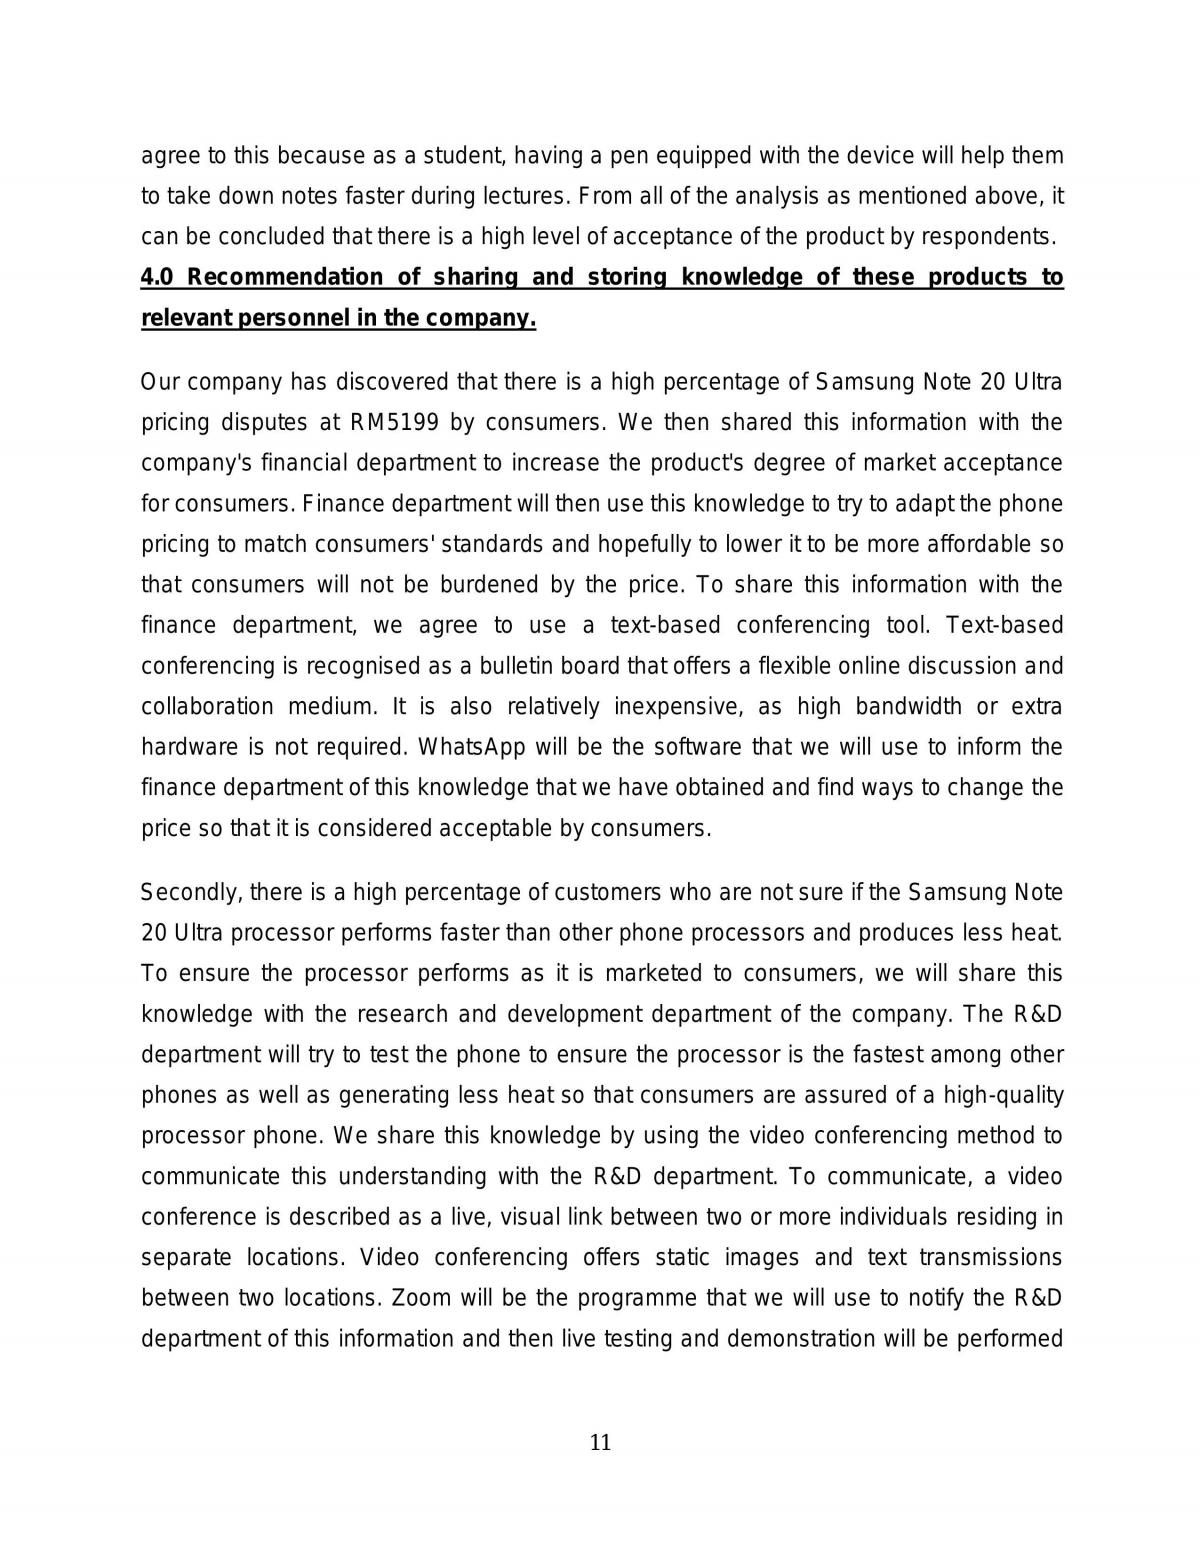 Analyses of Samsung smart phone - Page 11